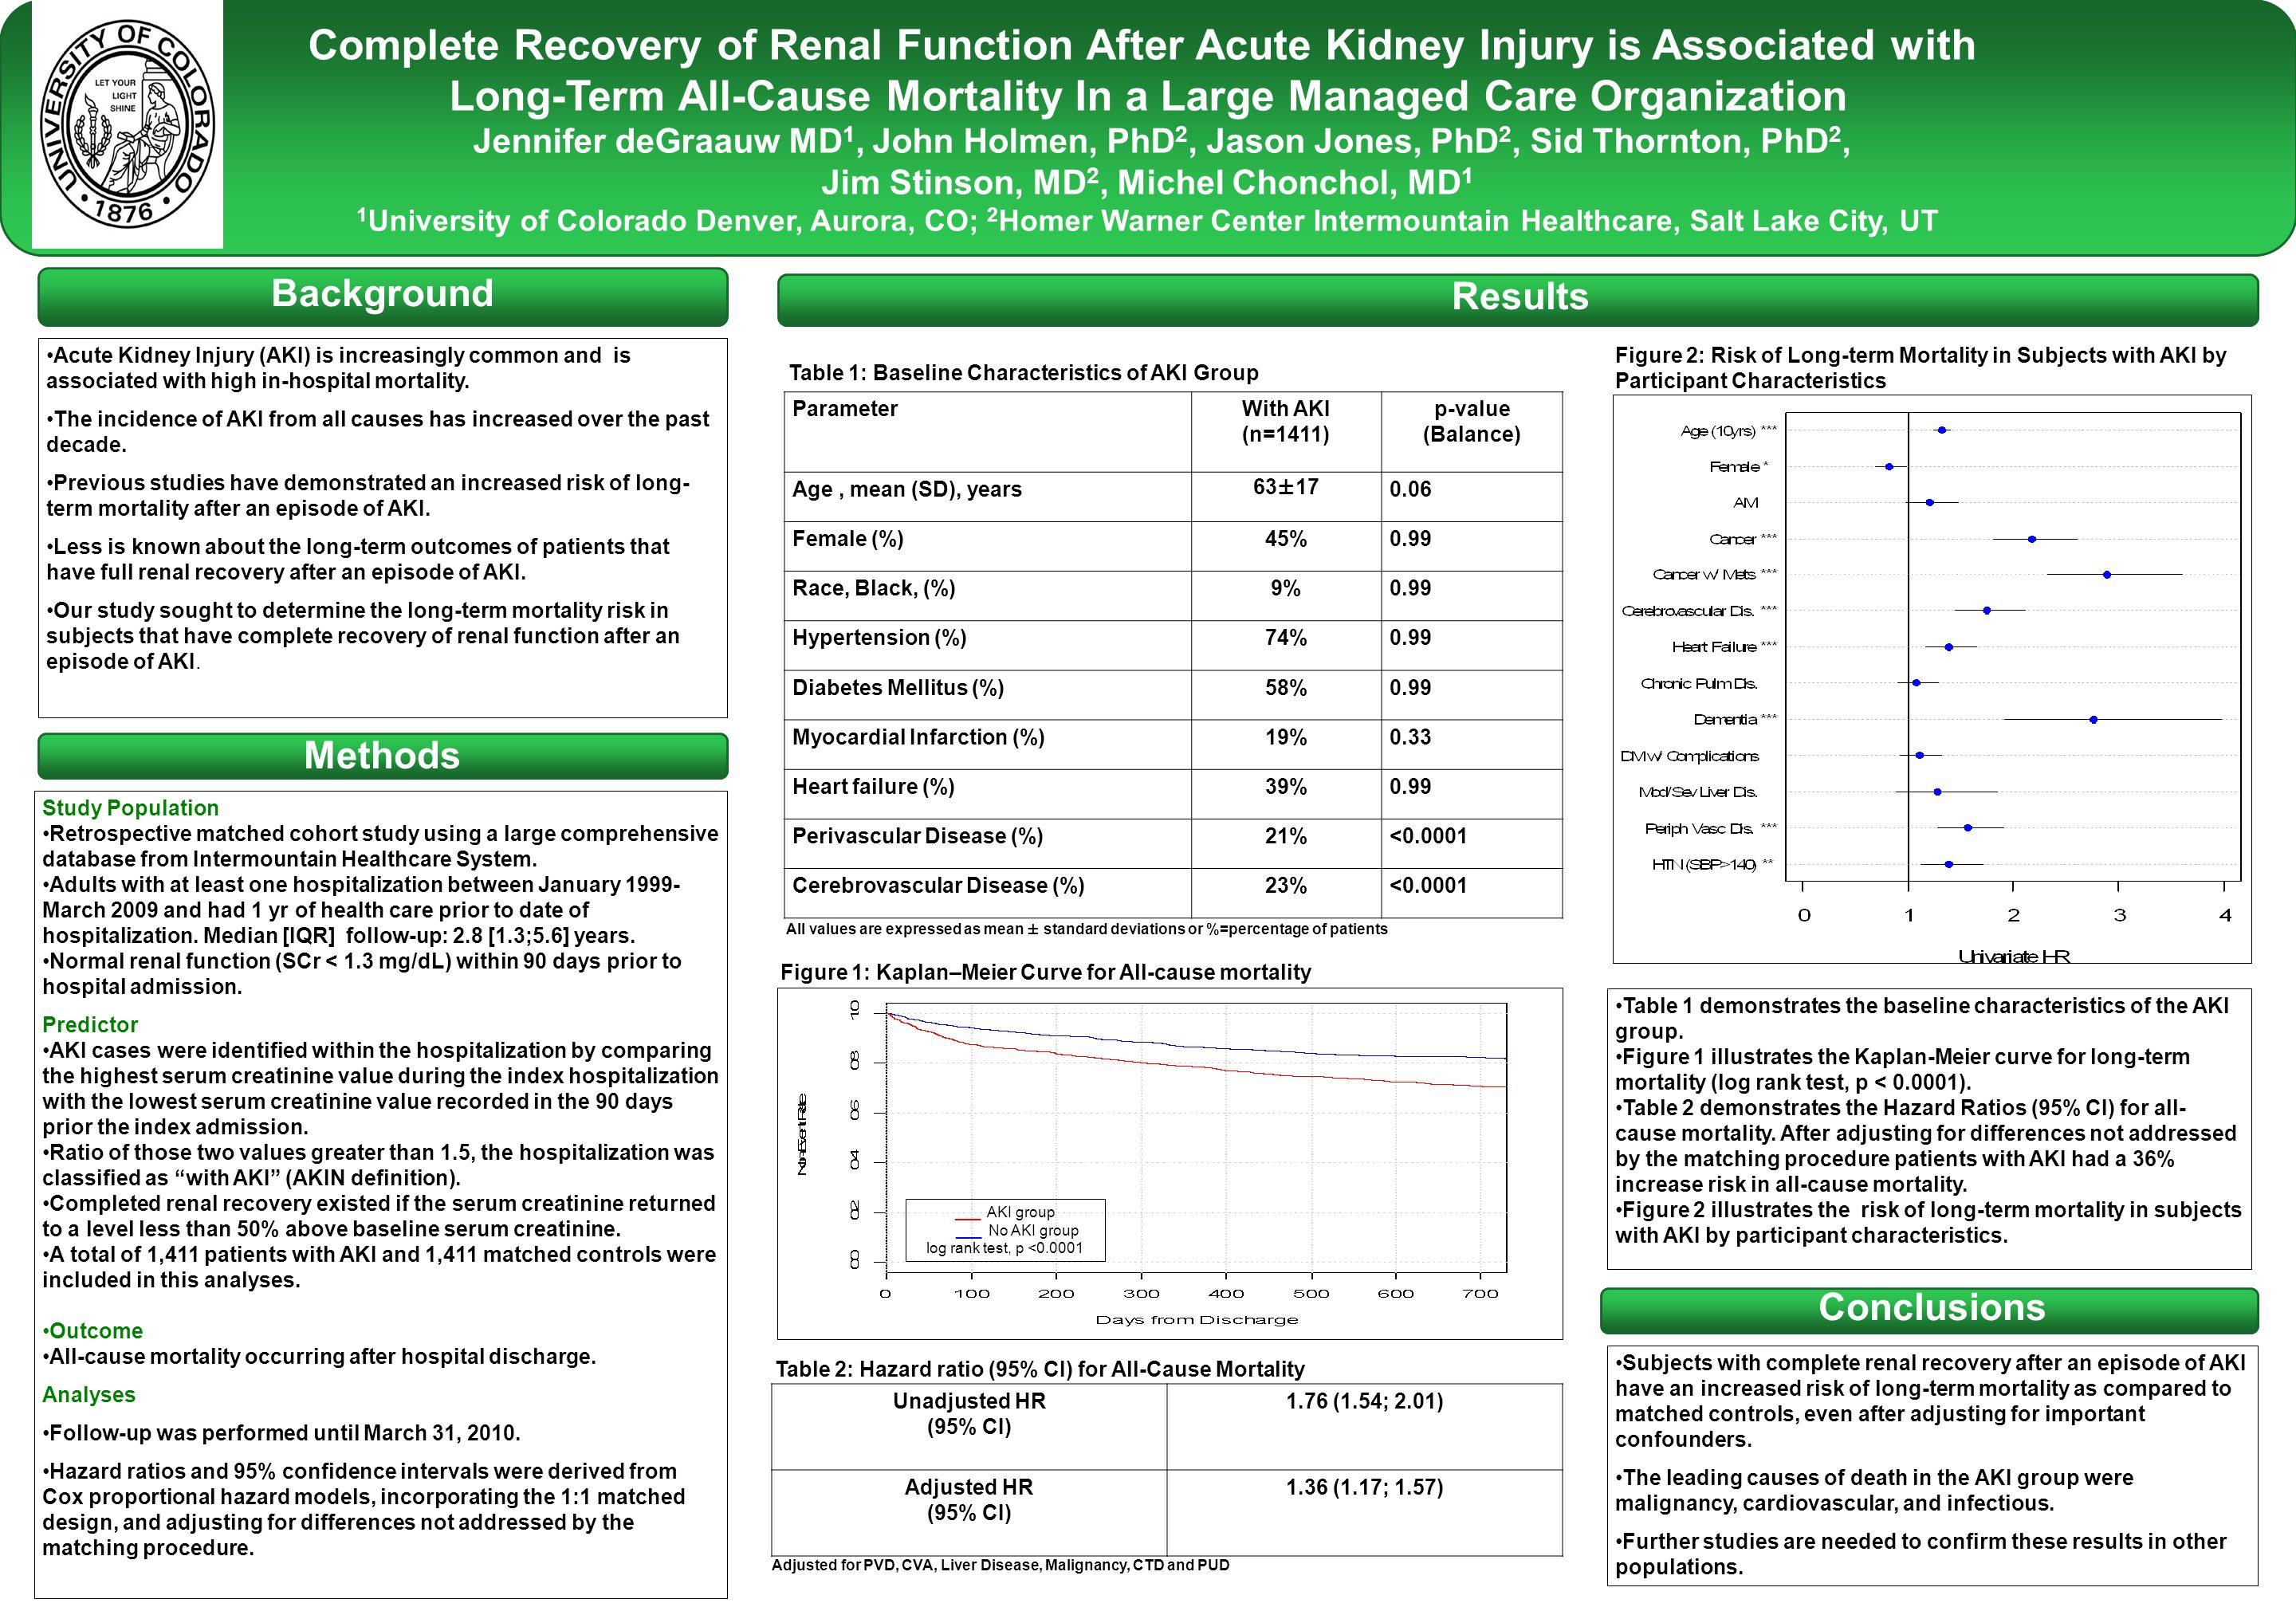 Complete Recovery of Renal Function After Acute Kidney Injury is Associated with Long-Term All-Cause Mortality In a Large Managed Care Organization Jennifer deGraauw MD 1, John Holmen, PhD 2, Jason Jones, PhD 2, Sid Thornton, PhD 2, Jim Stinson, MD 2, Michel Chonchol, MD 1 1 University of Colorado Denver, Aurora, CO; 2 Homer Warner Center Intermountain Healthcare, Salt Lake City, UT Background Methods Results Conclusions Printed by Acute Kidney Injury (AKI) is increasingly common and is associated with high in-hospital mortality.